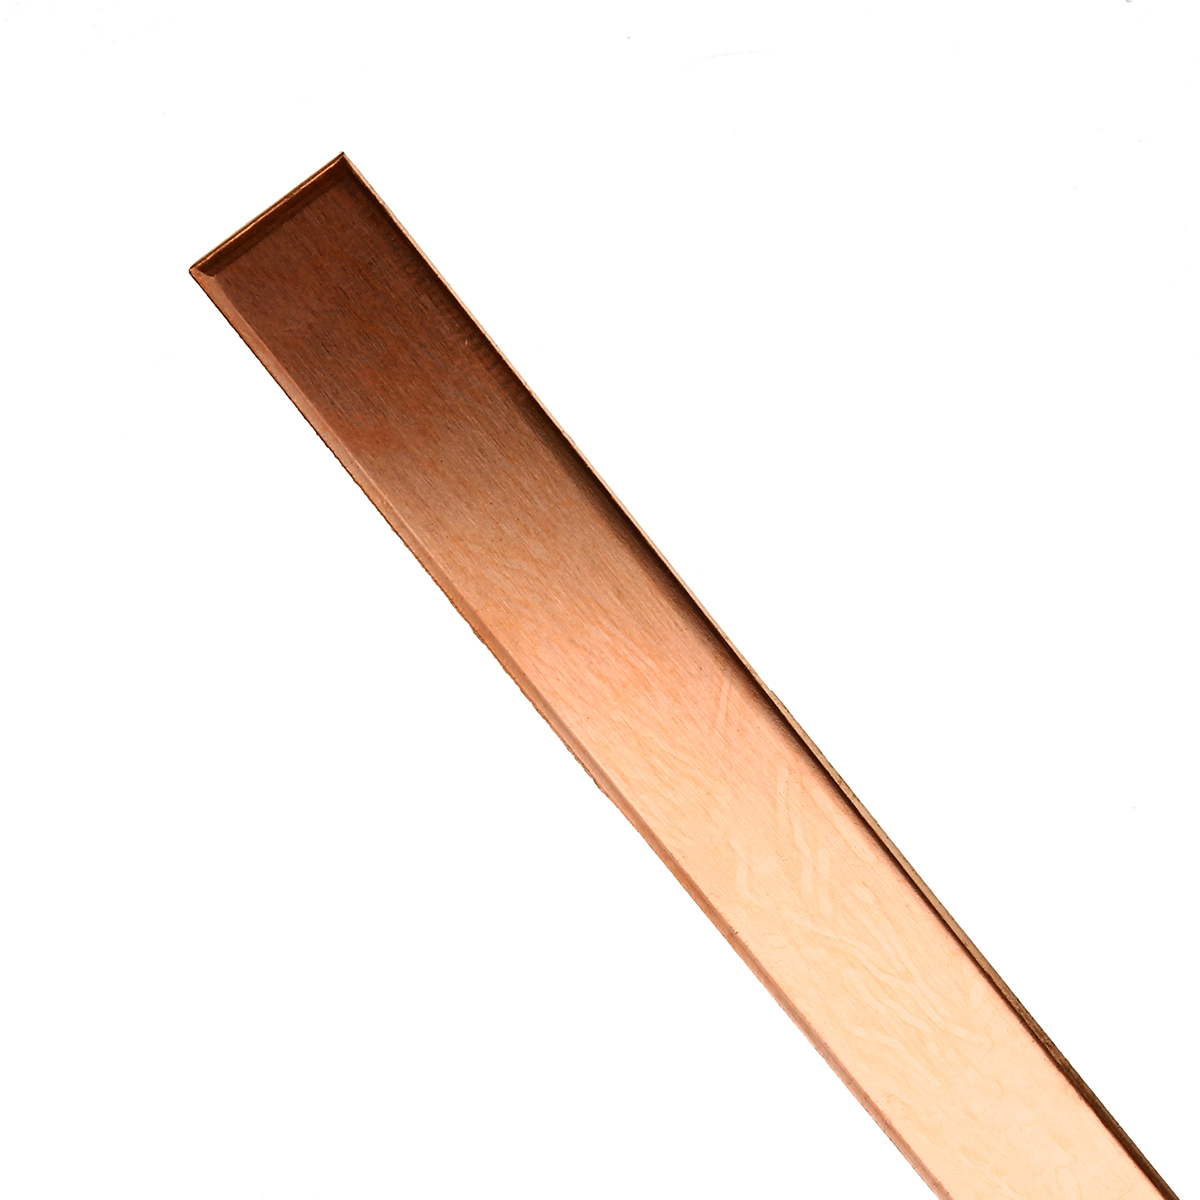 Rmage Myouzhen-Copper Sheet Plate 1pc 99% High Purity Copper Strip T2 Cu Copper Bar Metal Plate Industry DIY Experiment Sheet 210250mm Good Luster Great Ductility and weldability